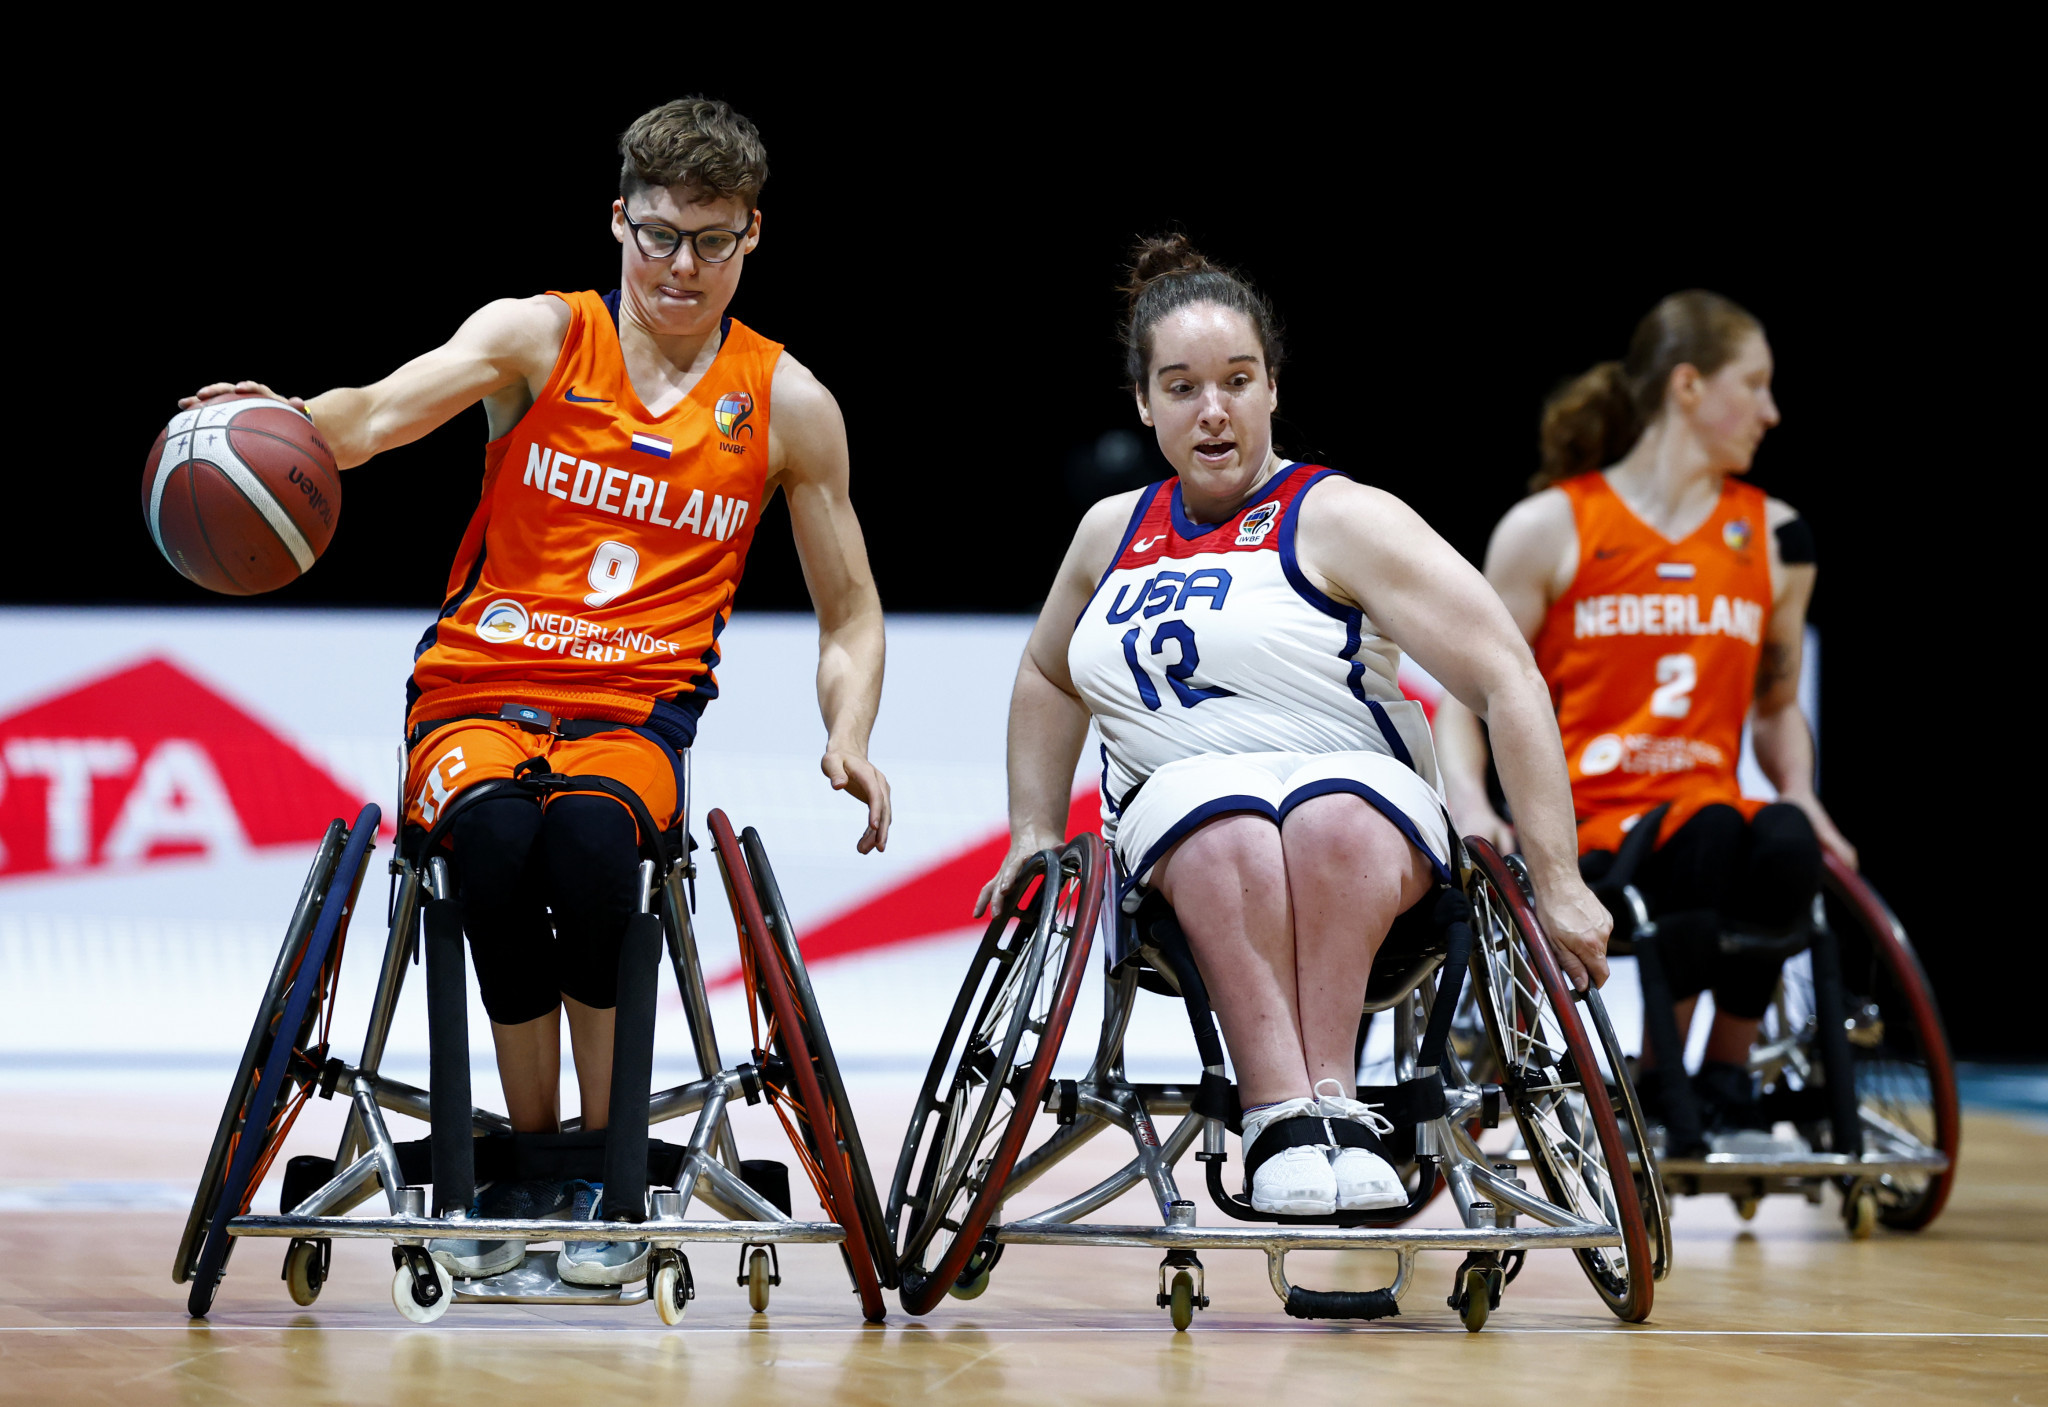 The Netherlands and the United States met in the semi-finals of both the men's and women's competitions at the IWBF World Championships, with both countries registering one win each ©Getty Images